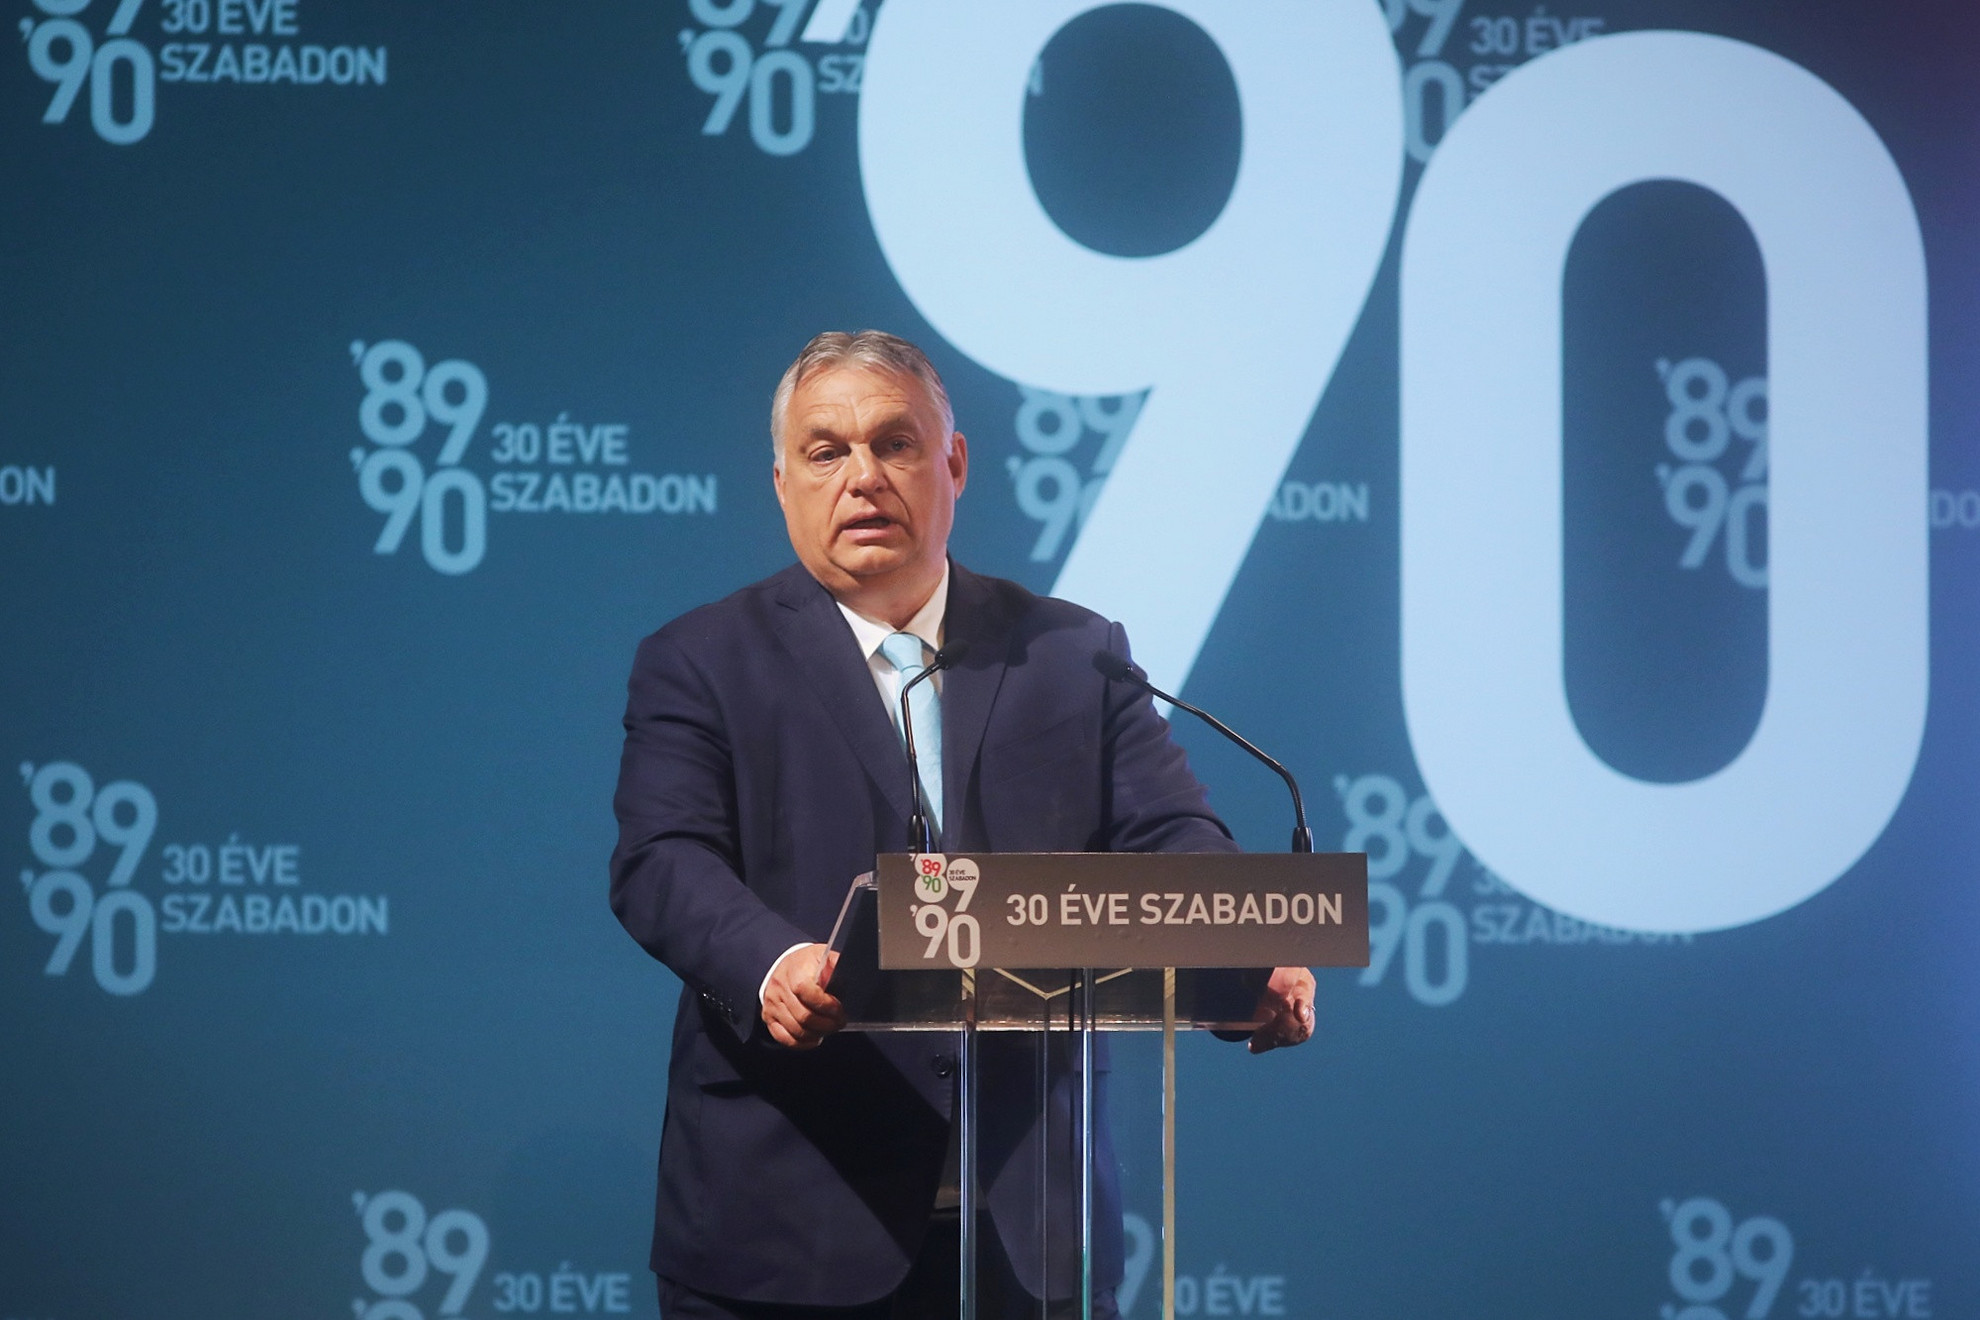 Prime Minister Viktor Orbán delivers a speech on the thirtieth anniversary of the withdrawal of Soviet troops in Vigado in Pest Photo: MH/Péter Papajcsik